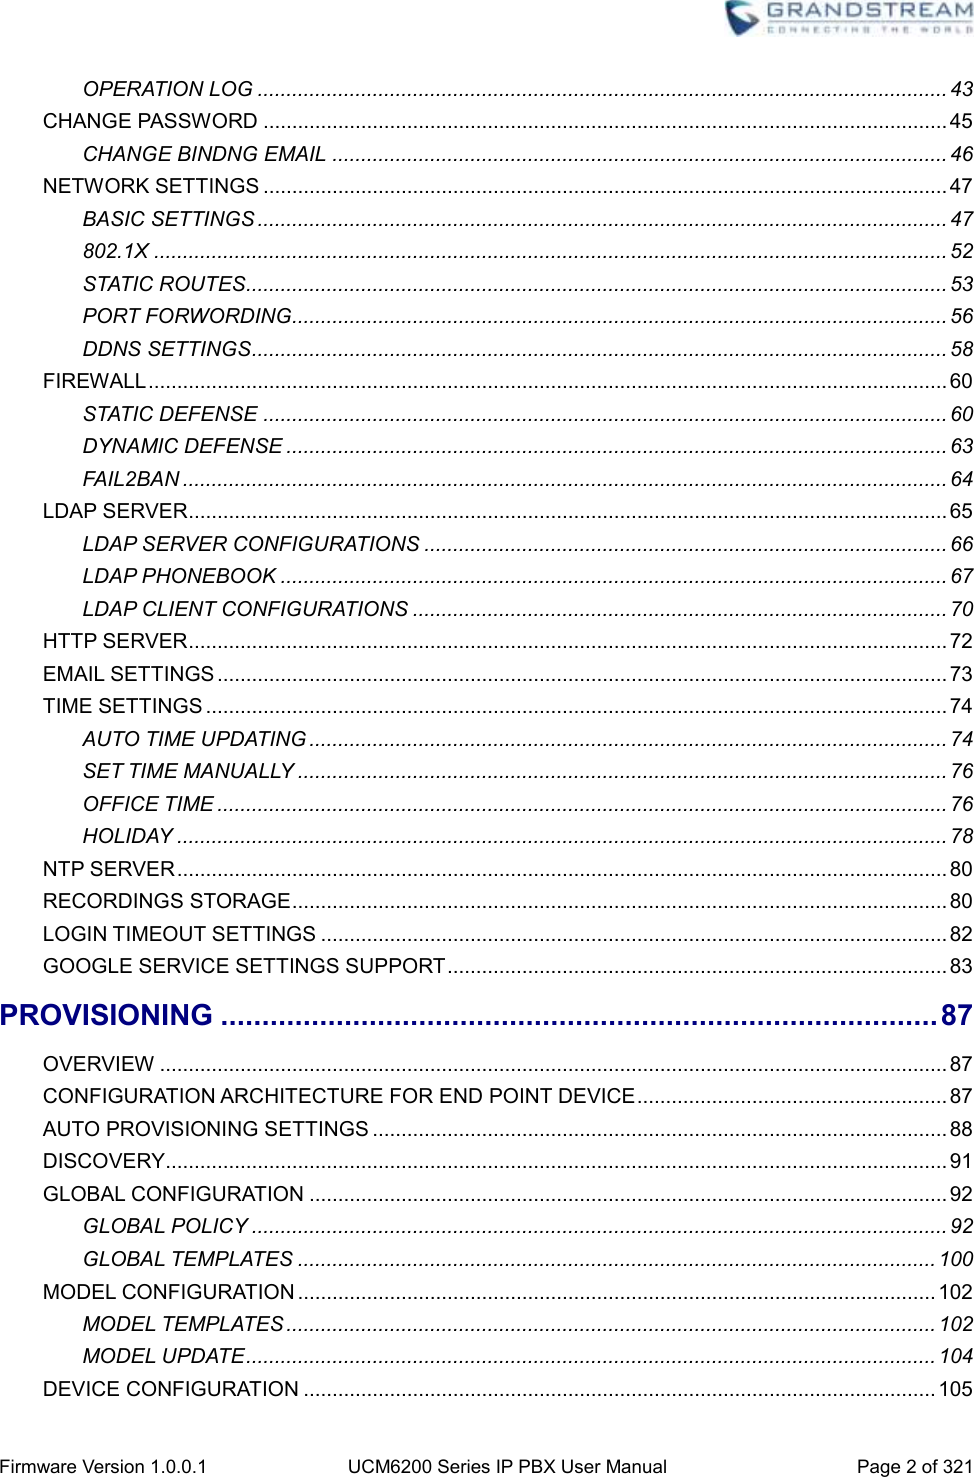  Firmware Version 1.0.0.1 UCM6200 Series IP PBX User Manual Page 2 of 321    OPERATION LOG ........................................................................................................................ 43 CHANGE PASSWORD ....................................................................................................................... 45 CHANGE BINDNG EMAIL ........................................................................................................... 46 NETWORK SETTINGS ....................................................................................................................... 47 BASIC SETTINGS ........................................................................................................................ 47 802.1X .......................................................................................................................................... 52 STATIC ROUTES.......................................................................................................................... 53 PORT FORWORDING.................................................................................................................. 56 DDNS SETTINGS ......................................................................................................................... 58 FIREWALL ........................................................................................................................................... 60 STATIC DEFENSE ....................................................................................................................... 60 DYNAMIC DEFENSE ................................................................................................................... 63 FAIL2BAN ..................................................................................................................................... 64 LDAP SERVER .................................................................................................................................... 65 LDAP SERVER CONFIGURATIONS ........................................................................................... 66 LDAP PHONEBOOK .................................................................................................................... 67 LDAP CLIENT CONFIGURATIONS ............................................................................................. 70 HTTP SERVER .................................................................................................................................... 72 EMAIL SETTINGS ............................................................................................................................... 73 TIME SETTINGS ................................................................................................................................. 74 AUTO TIME UPDATING ............................................................................................................... 74 SET TIME MANUALLY ................................................................................................................. 76 OFFICE TIME ............................................................................................................................... 76 HOLIDAY ...................................................................................................................................... 78 NTP SERVER ...................................................................................................................................... 80 RECORDINGS STORAGE .................................................................................................................. 80 LOGIN TIMEOUT SETTINGS ............................................................................................................. 82 GOOGLE SERVICE SETTINGS SUPPORT ....................................................................................... 83 PROVISIONING ....................................................................................... 87 OVERVIEW ......................................................................................................................................... 87 CONFIGURATION ARCHITECTURE FOR END POINT DEVICE ...................................................... 87 AUTO PROVISIONING SETTINGS .................................................................................................... 88 DISCOVERY ........................................................................................................................................ 91 GLOBAL CONFIGURATION ............................................................................................................... 92 GLOBAL POLICY ......................................................................................................................... 92 GLOBAL TEMPLATES ............................................................................................................... 100 MODEL CONFIGURATION ............................................................................................................... 102 MODEL TEMPLATES ................................................................................................................. 102 MODEL UPDATE ........................................................................................................................ 104 DEVICE CONFIGURATION .............................................................................................................. 105 